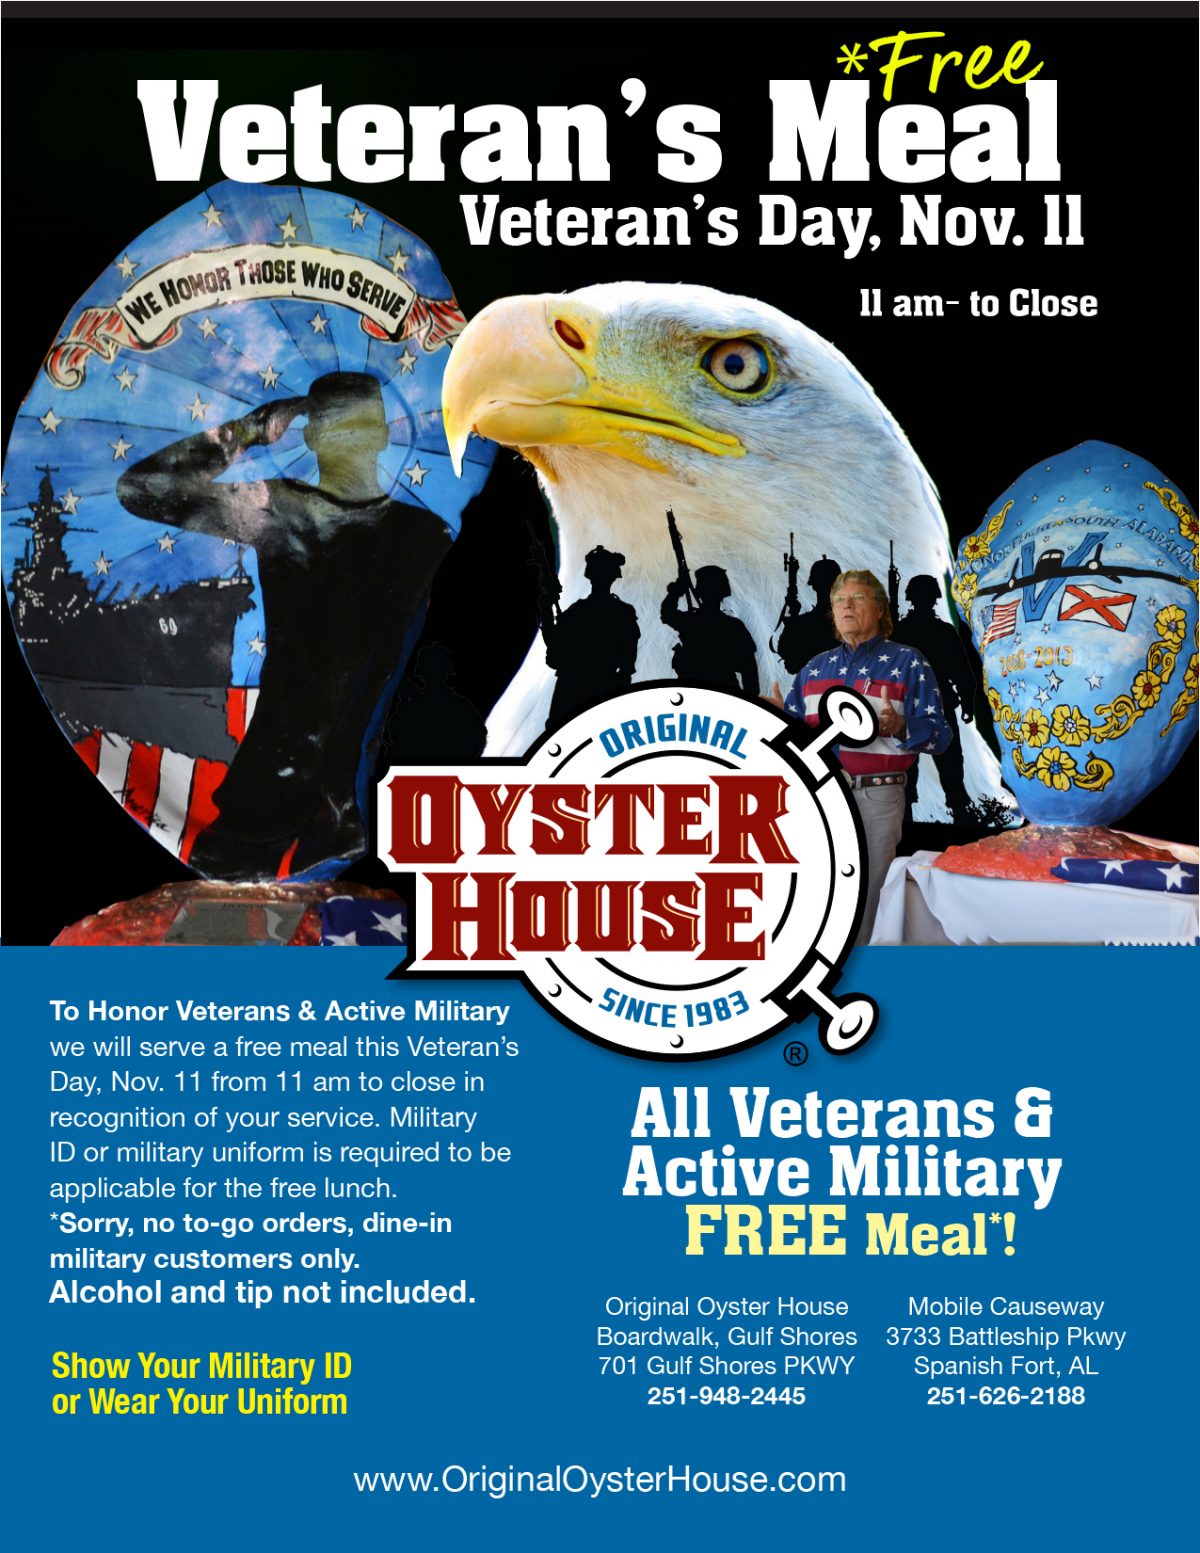 Original Oyster House Honors Military with a Free Meal on Veteran’s Day